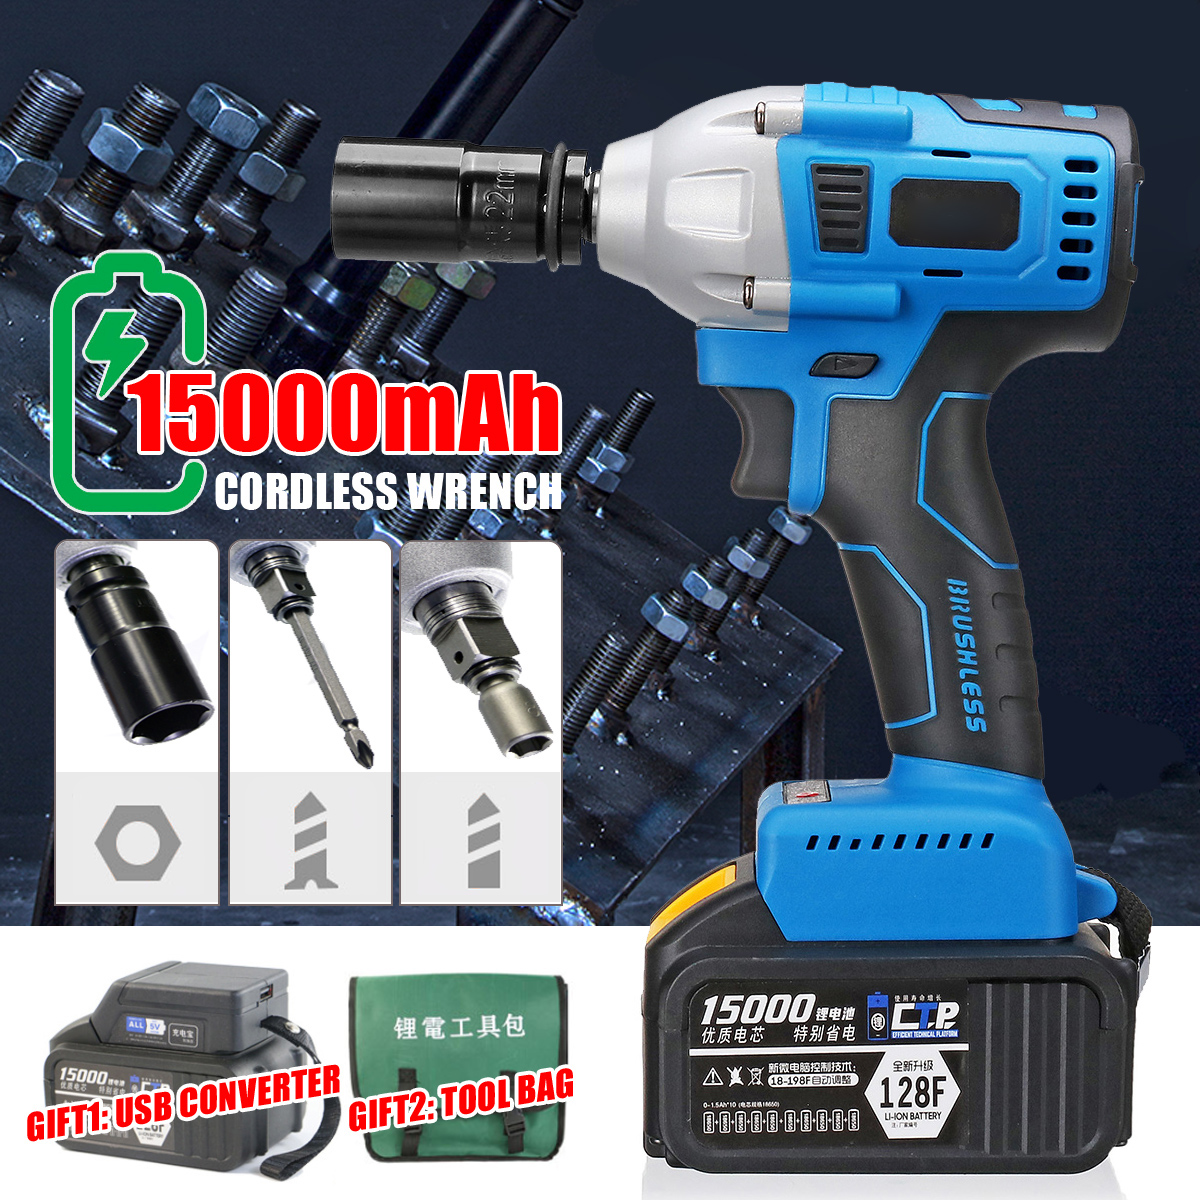 15000mAh-Electric-Impact-Wrench-340Nm-Cordless-Brushless-with-2-Lithium-Battery-1392865-1